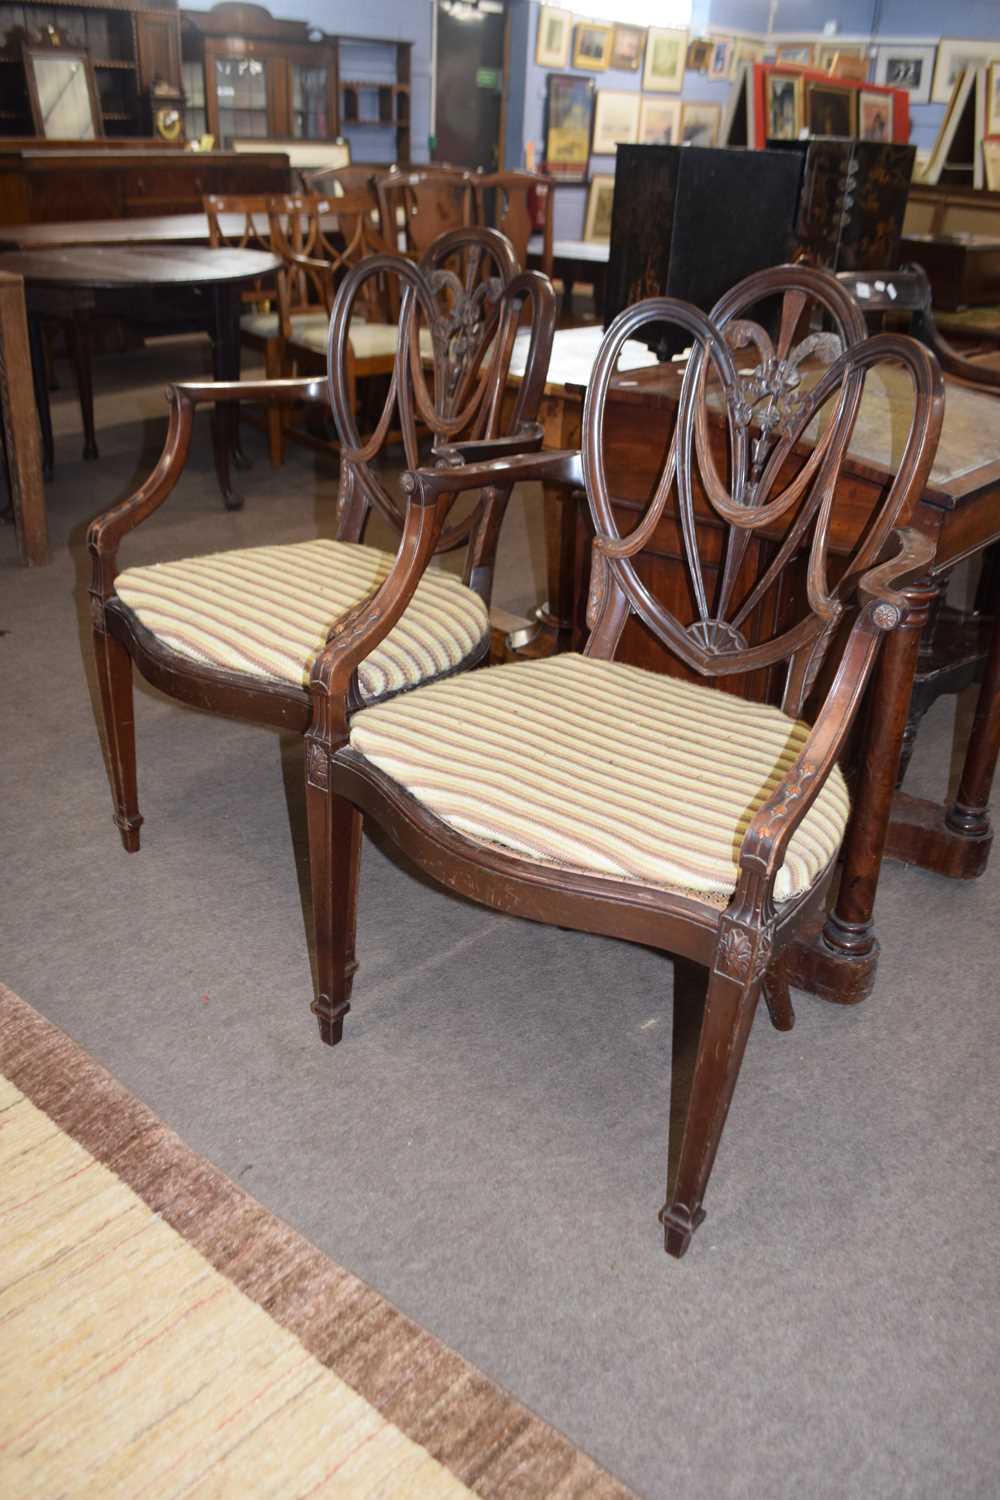 Pair of Georgian style mahogany armchairs with shaped back with fleur de lis decoration over cane - Image 2 of 2